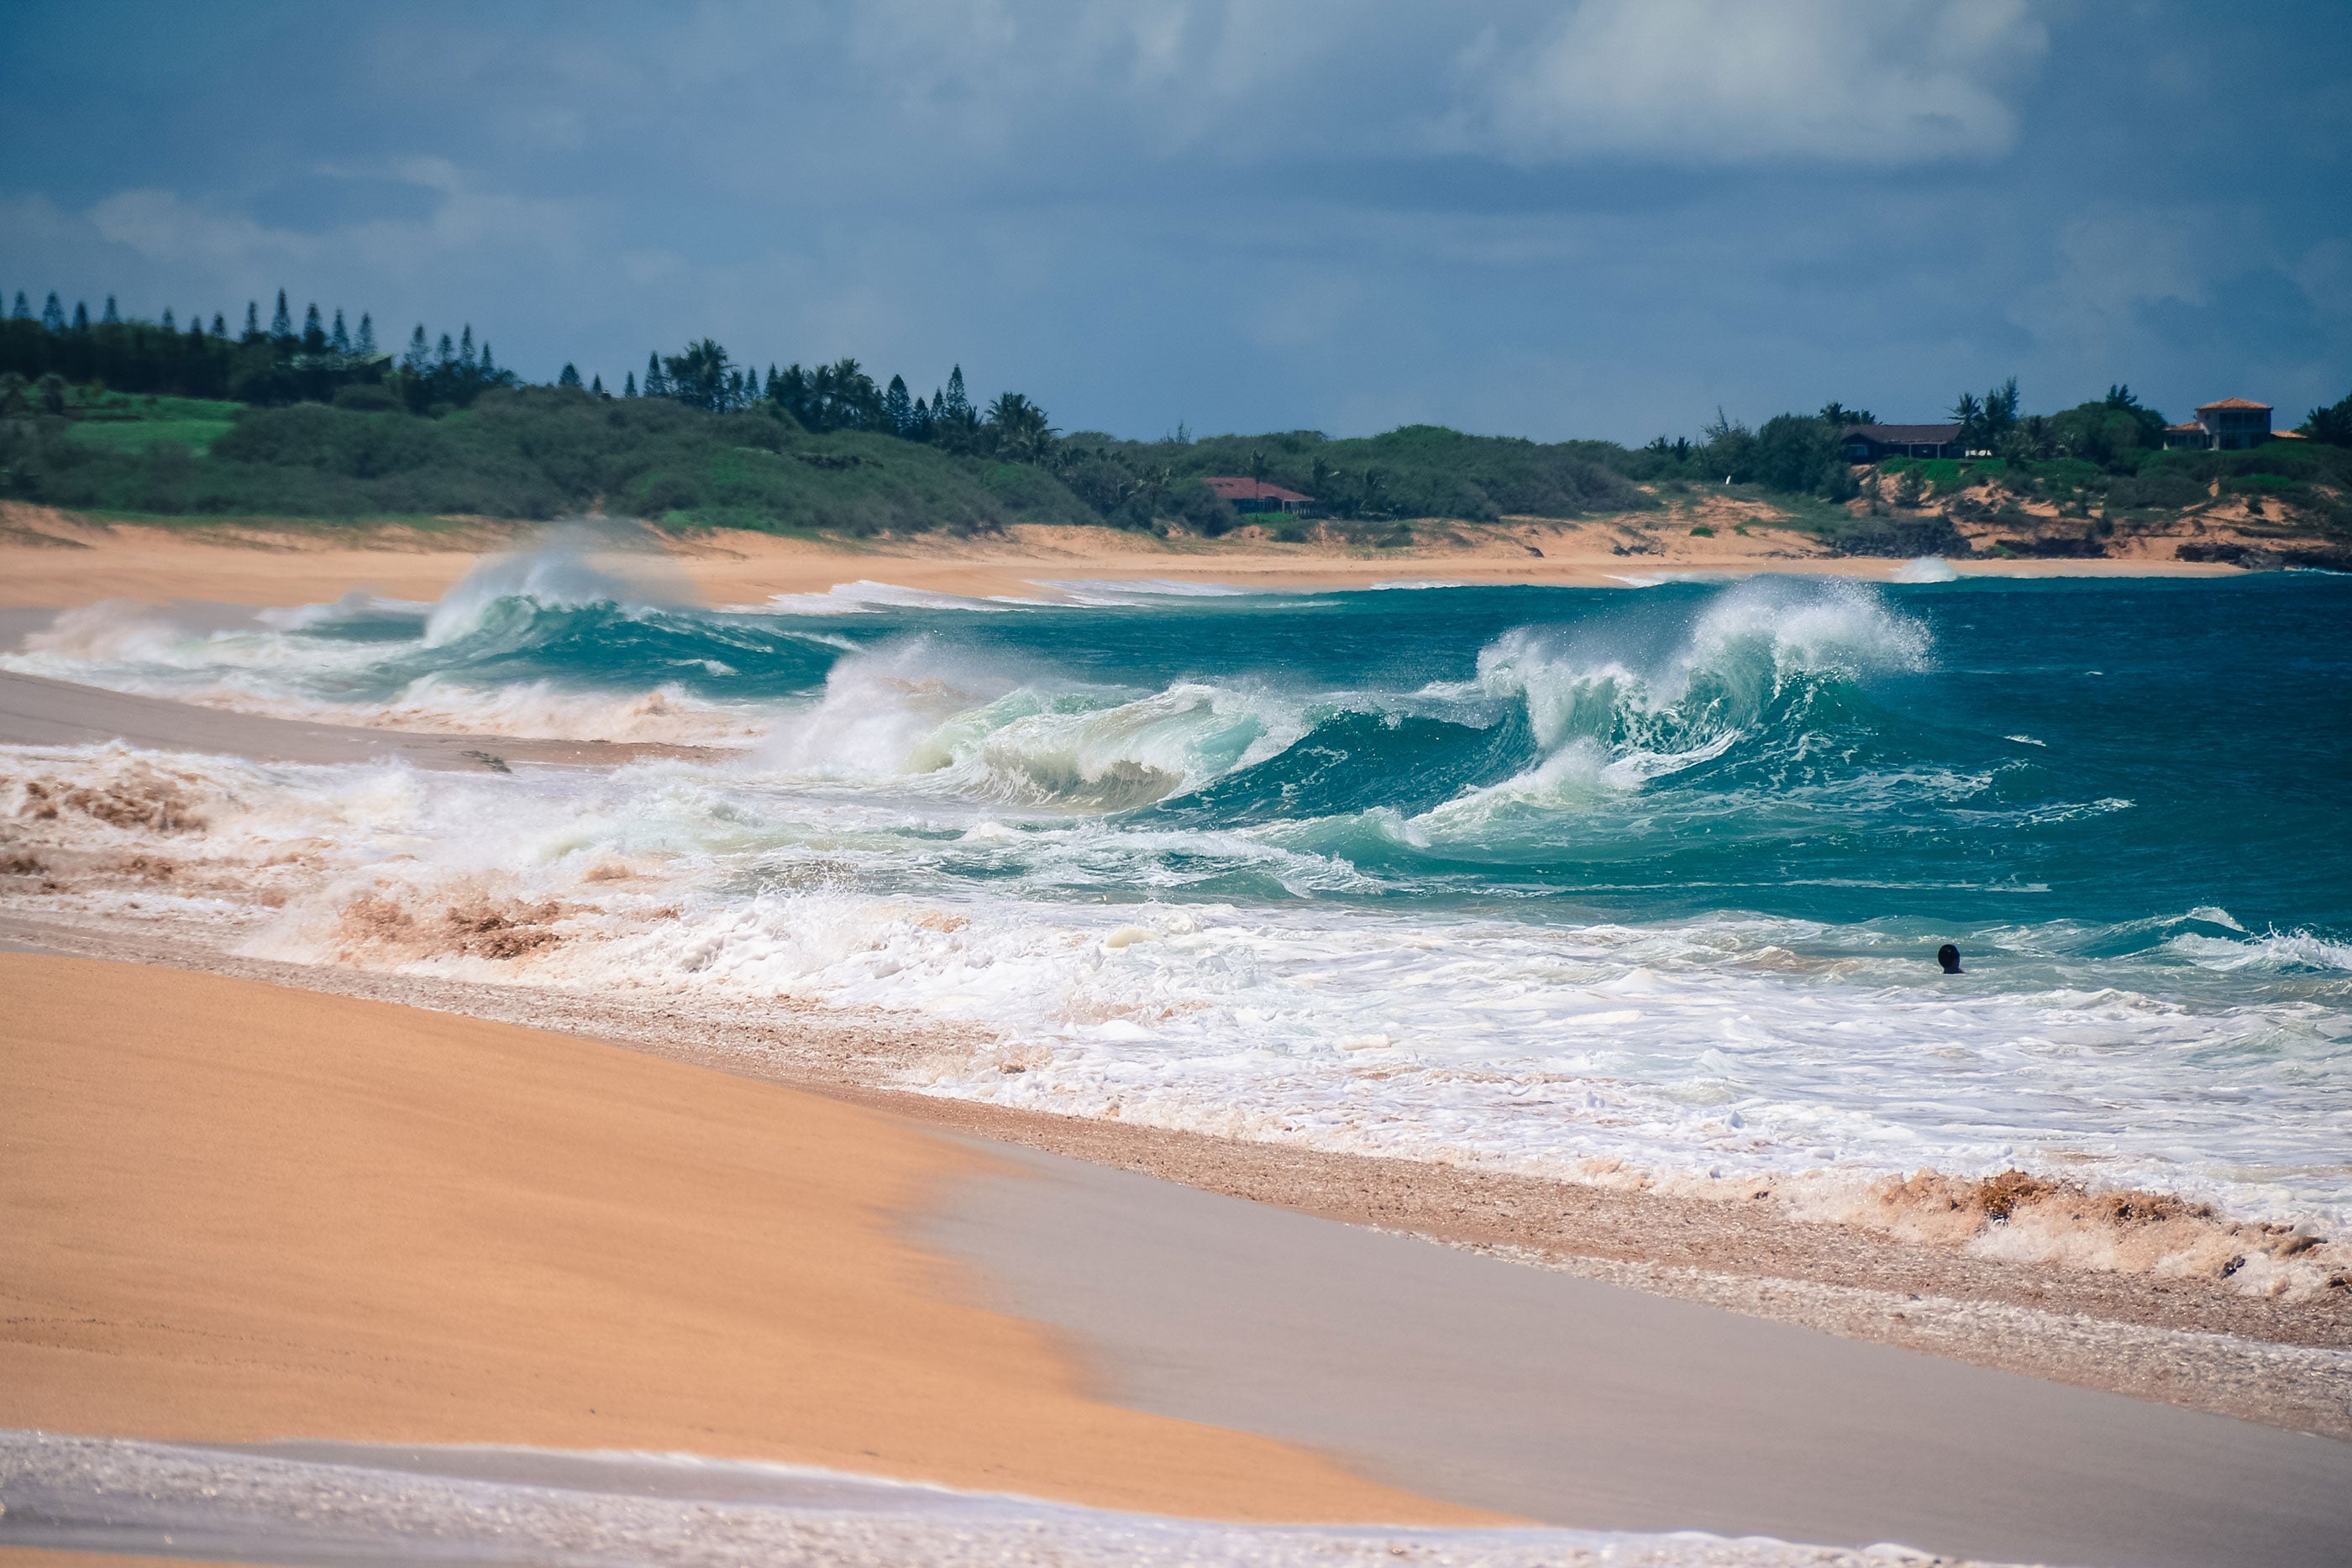 Unspoiled beaches are everywhere in Molokai